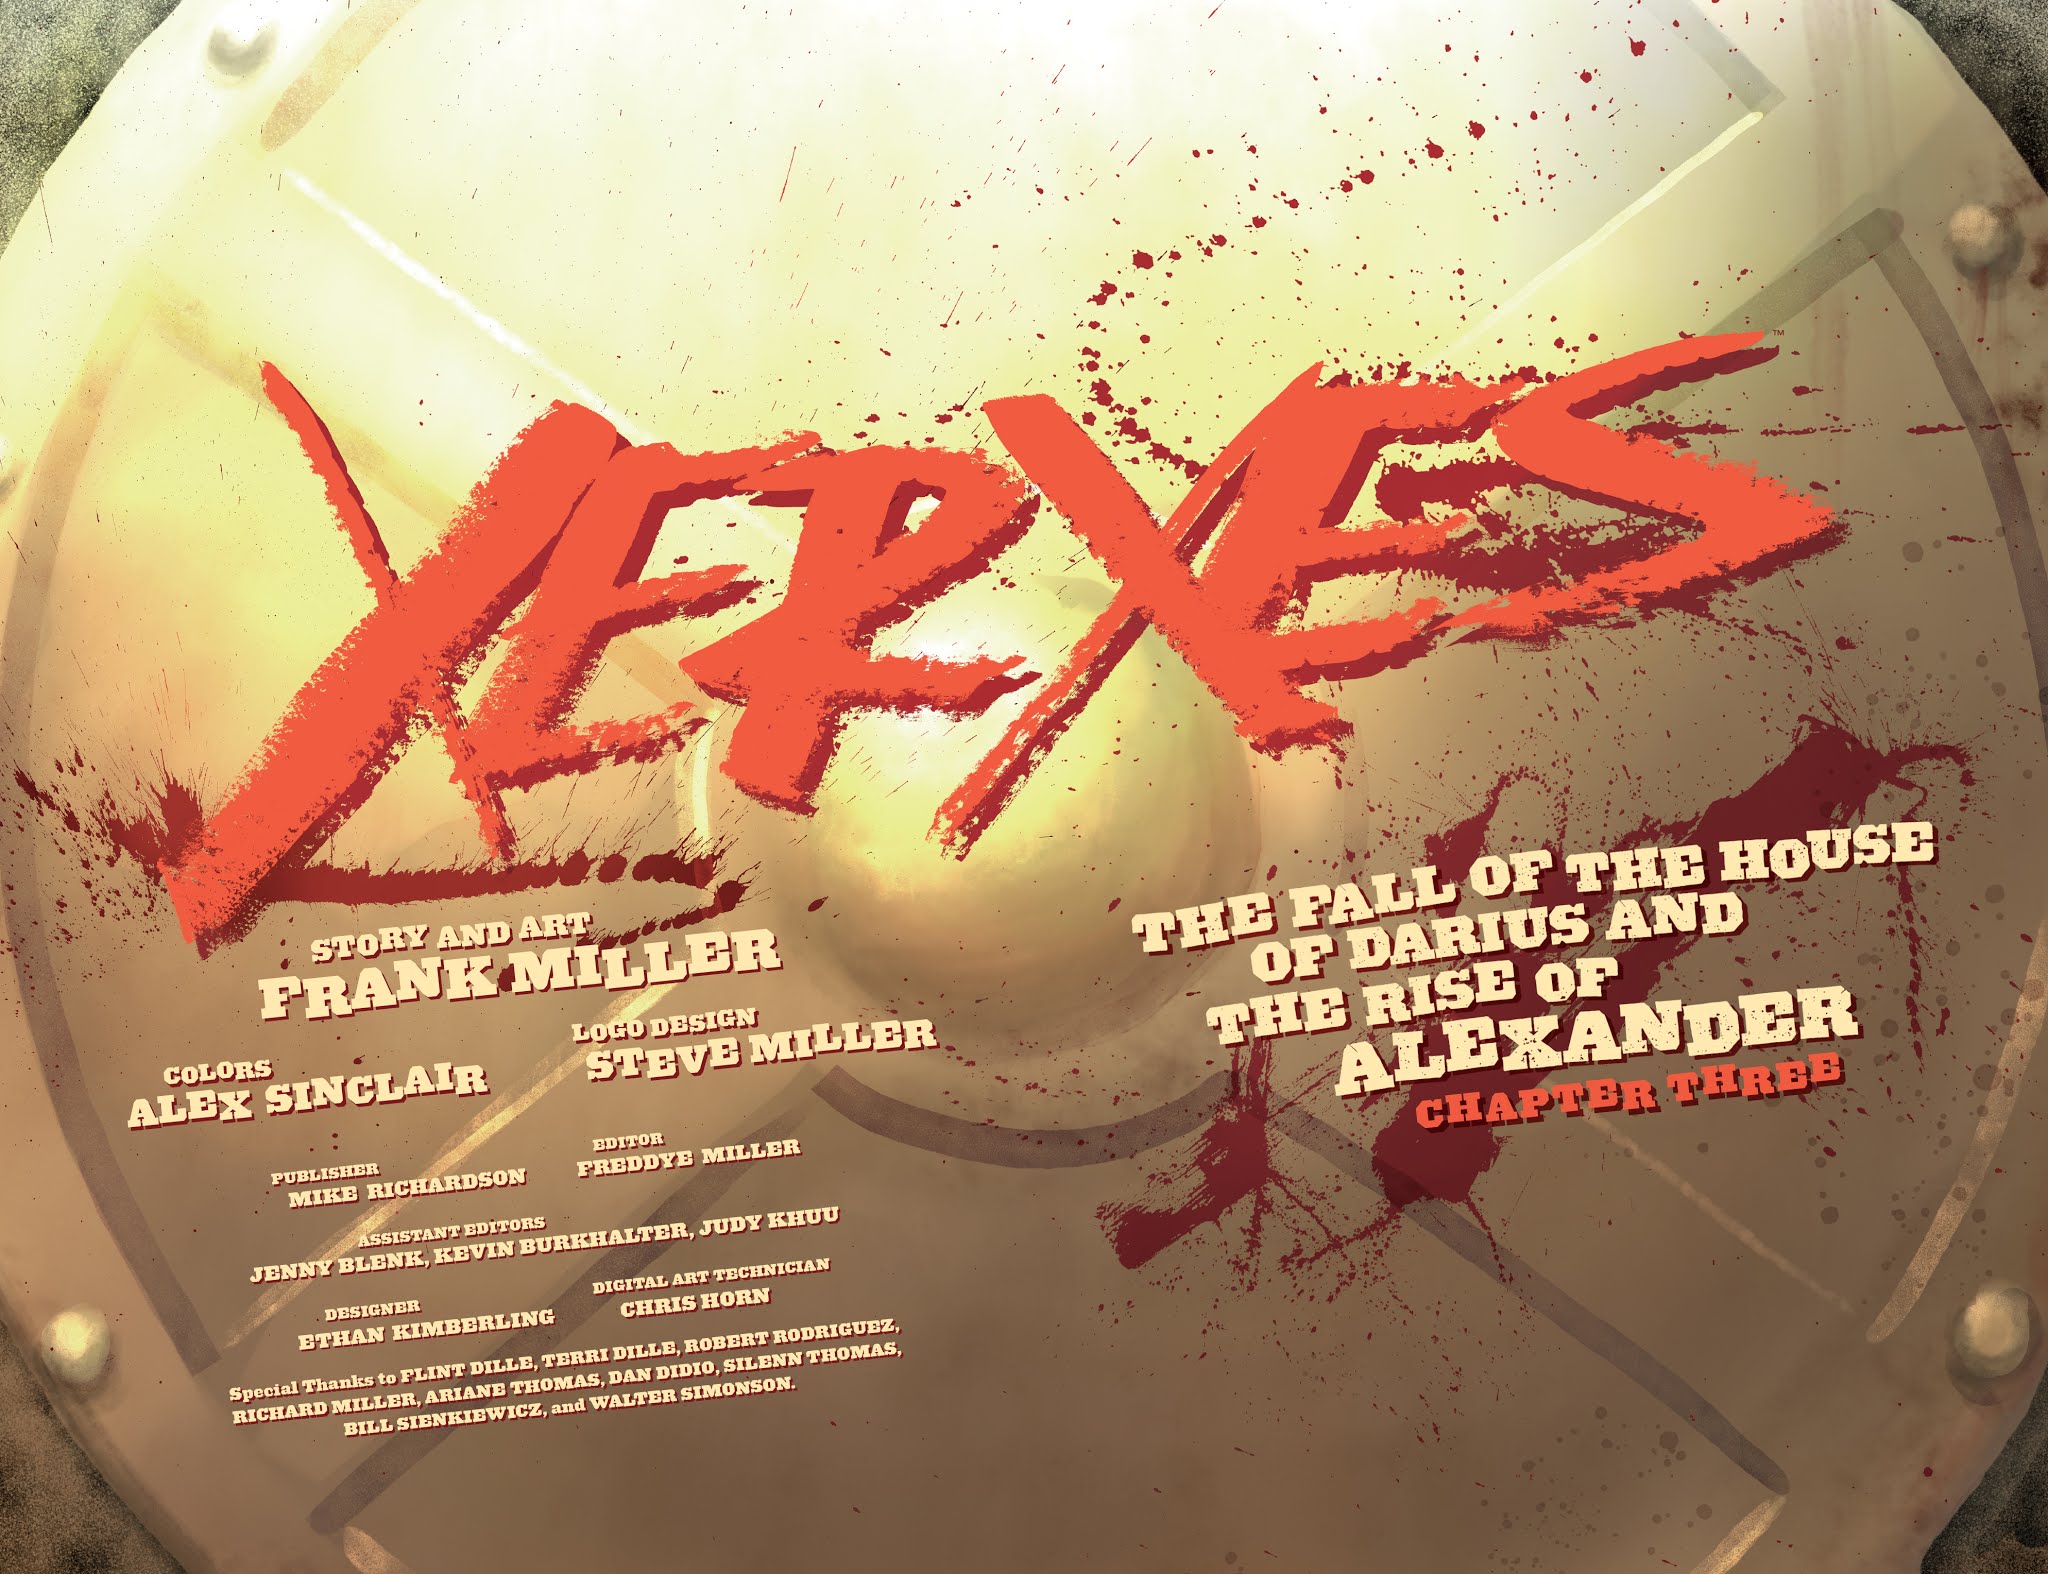 Read online Xerxes: The Fall of the House of Darius and the Rise of Alexander comic -  Issue #3 - 2